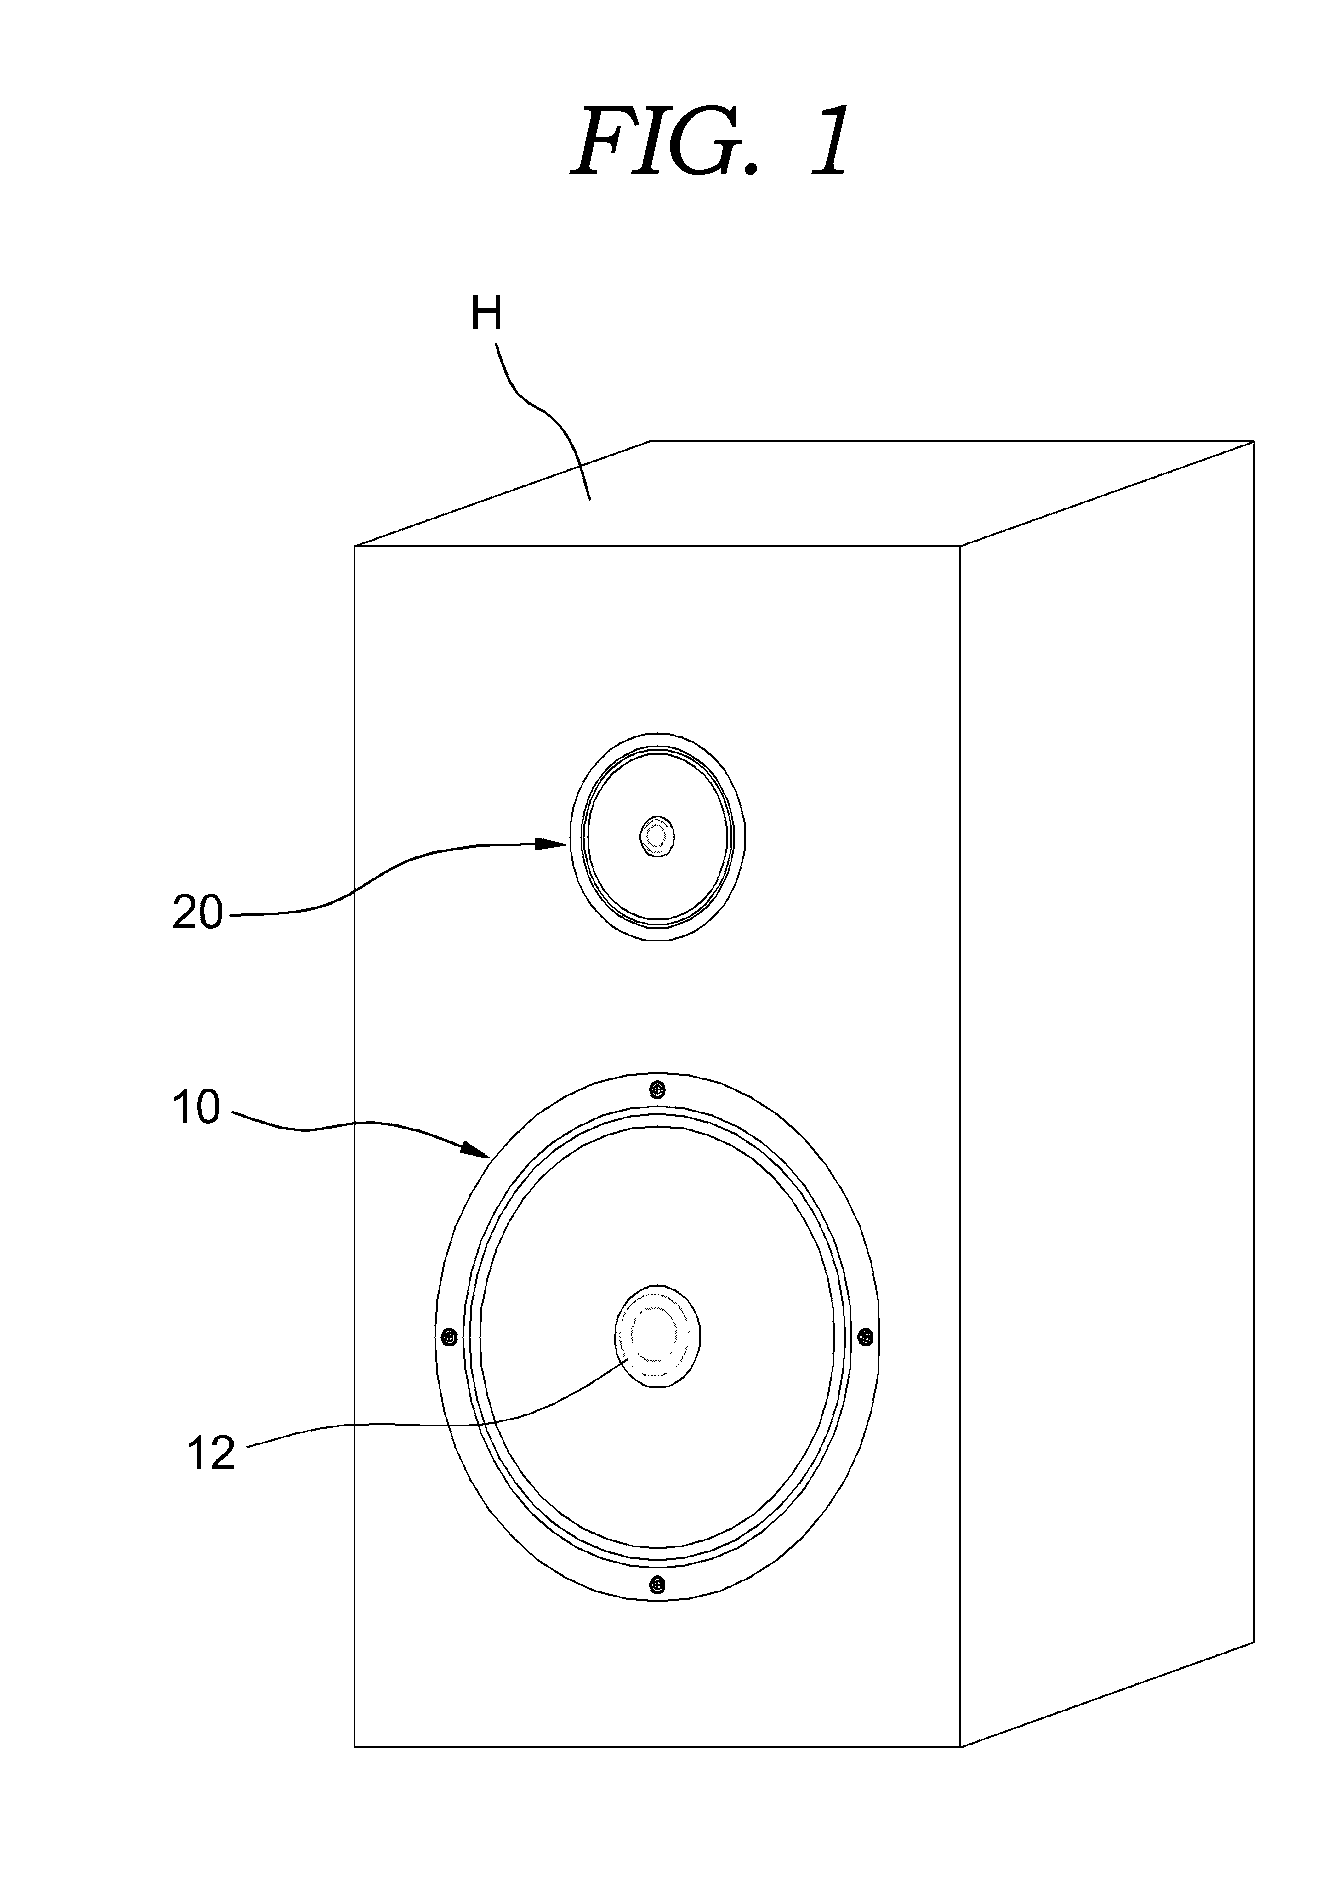 2-Way Speaker with Coaxial Effect